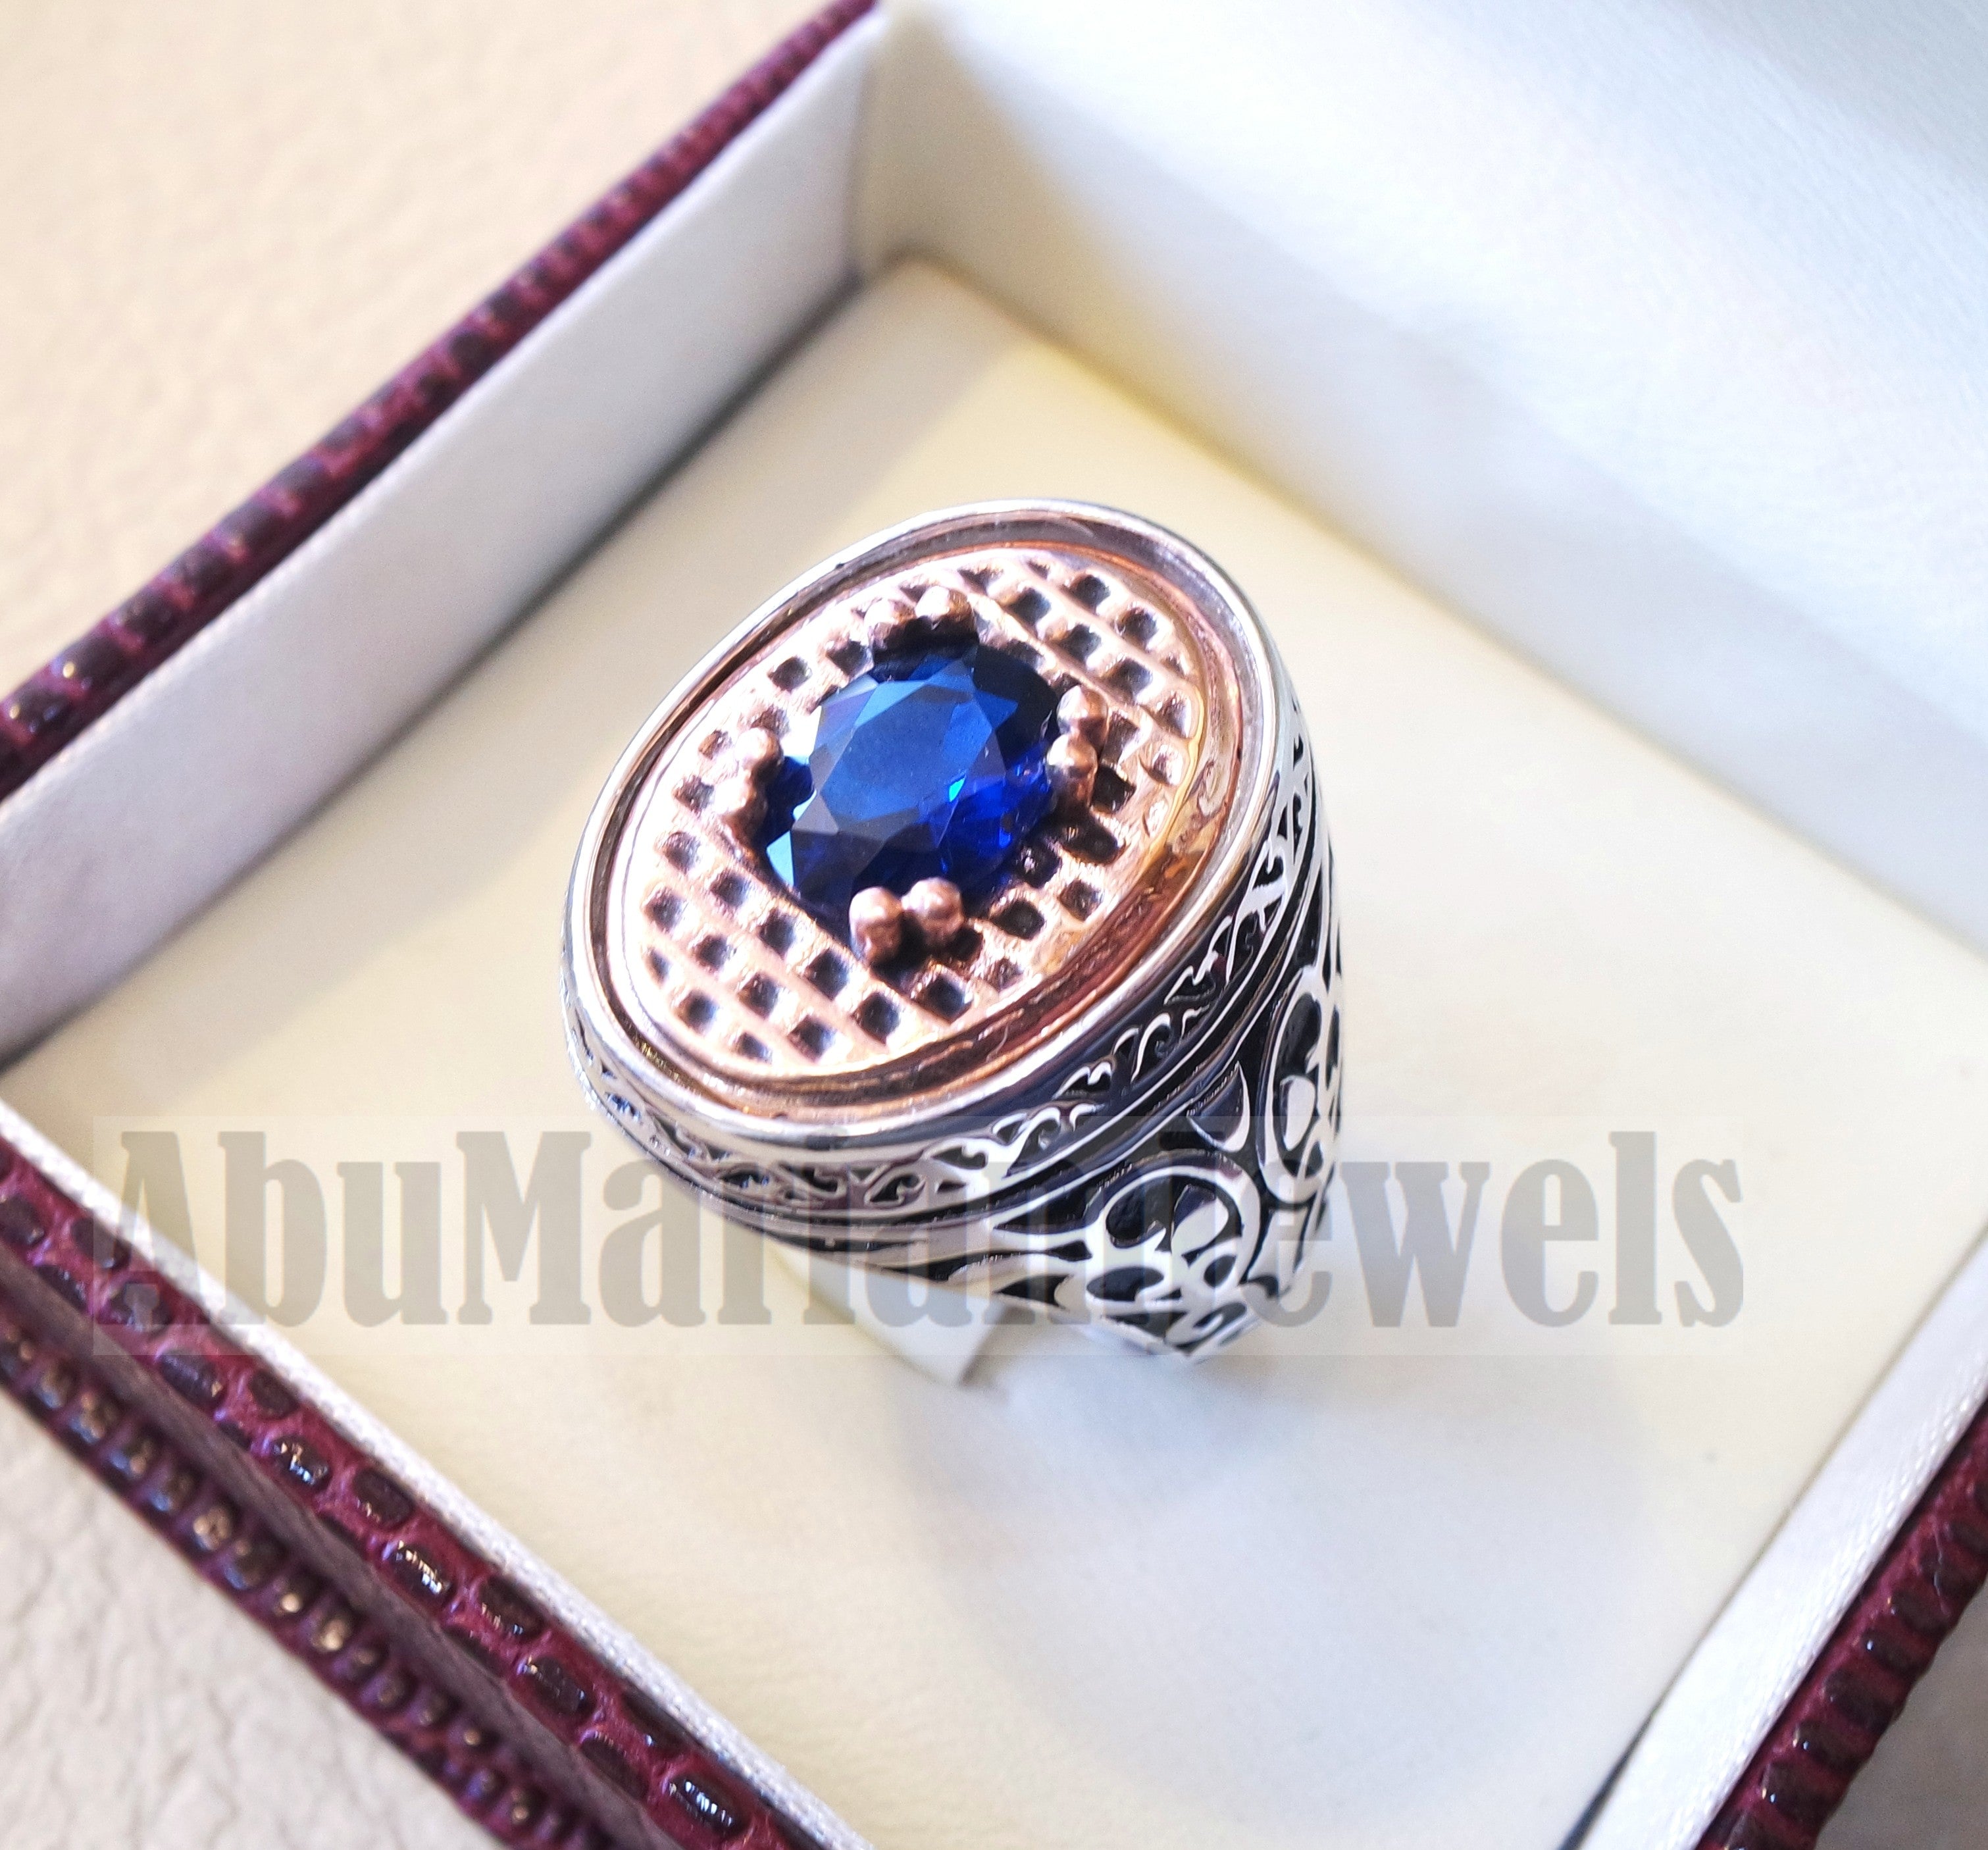 sapphire ring synthetic spinel stone identical to genuine gem men ring sterling silver 925 bronze frame gemstone any size jewelry